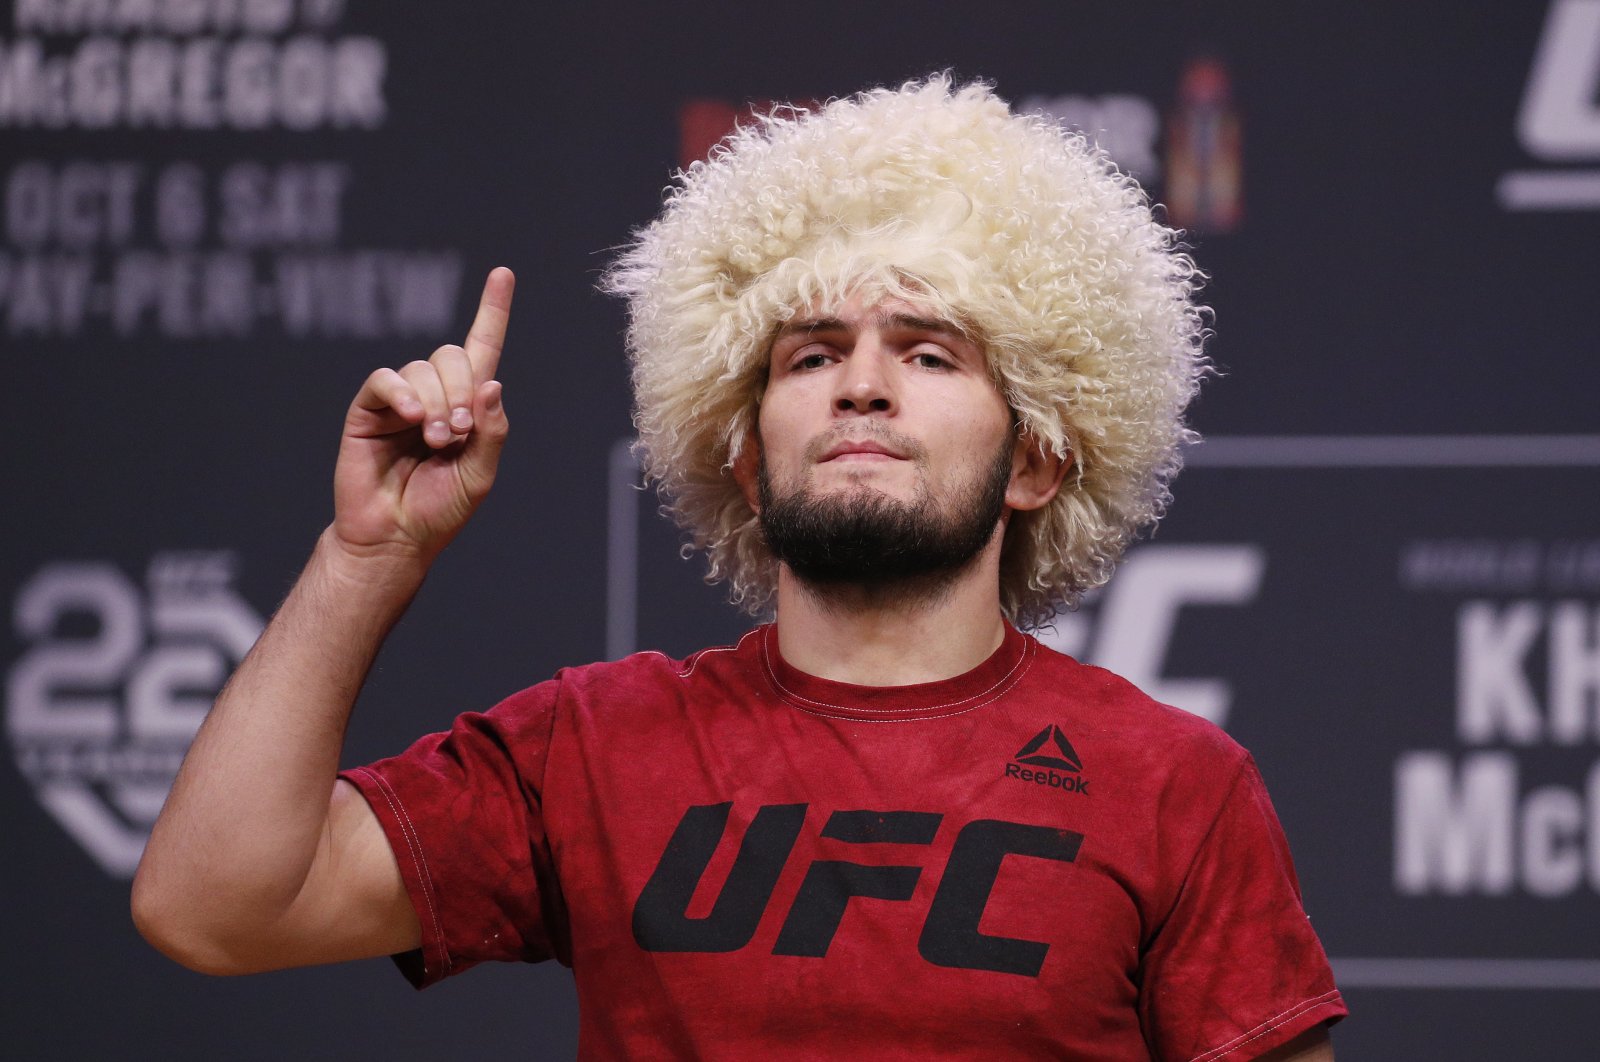 Khabib Nurmagomedov poses during a ceremonial weigh-in for the UFC 229 mixed martial arts fight, in Las Vegas, Nevada, U.S., Oct. 5, 2018. (AP Photo)